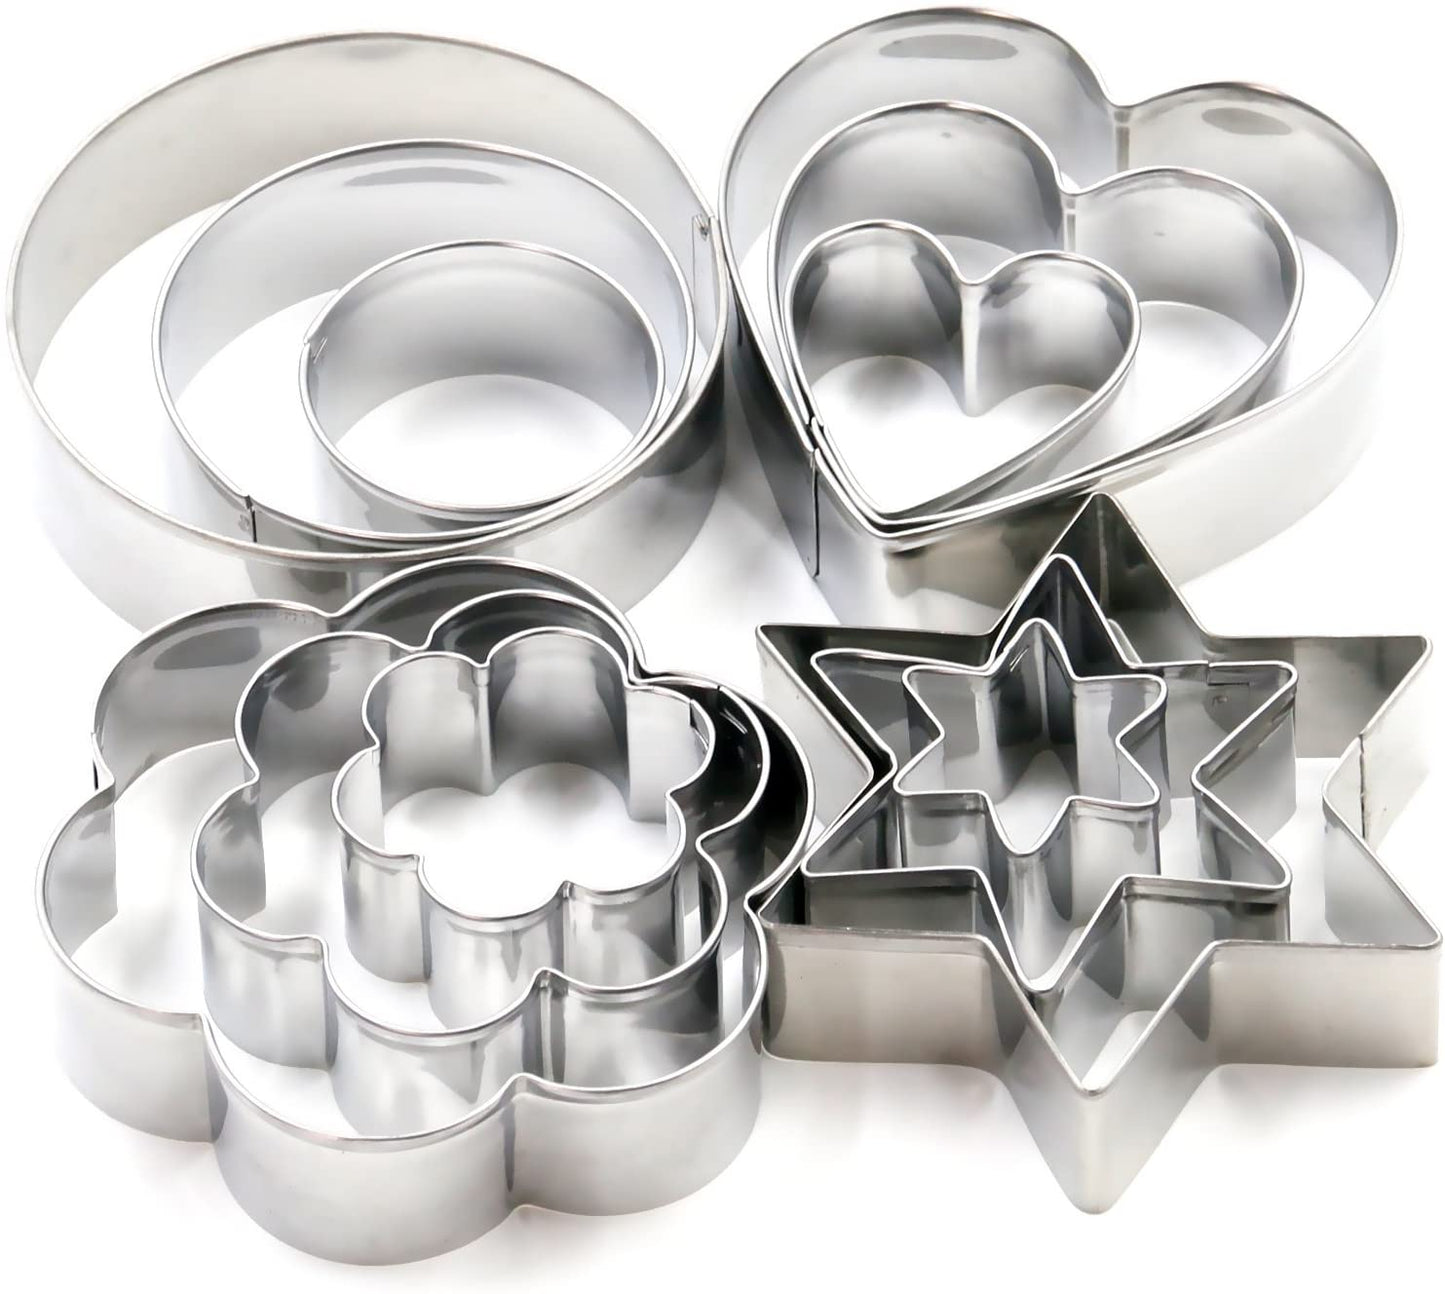 12 Pcs Set Stainless Steel Cookie Cutter Biscuit DIY Mold Star Heart Round Flower Shape Mould Baking Tools - Deliverrpk